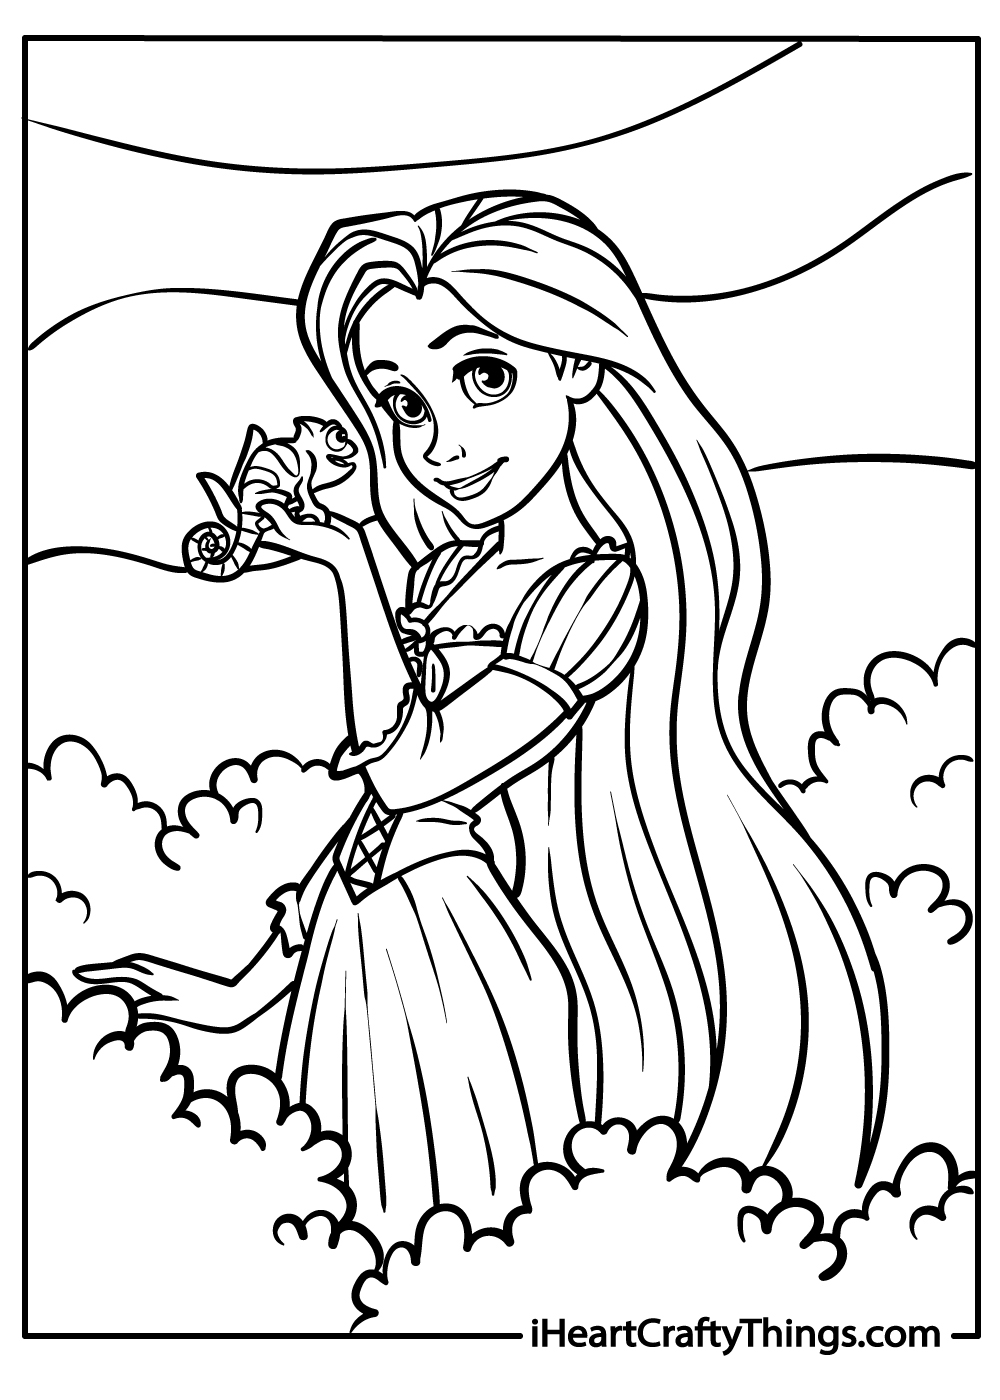 black-and-white rapunzel coloring sheet